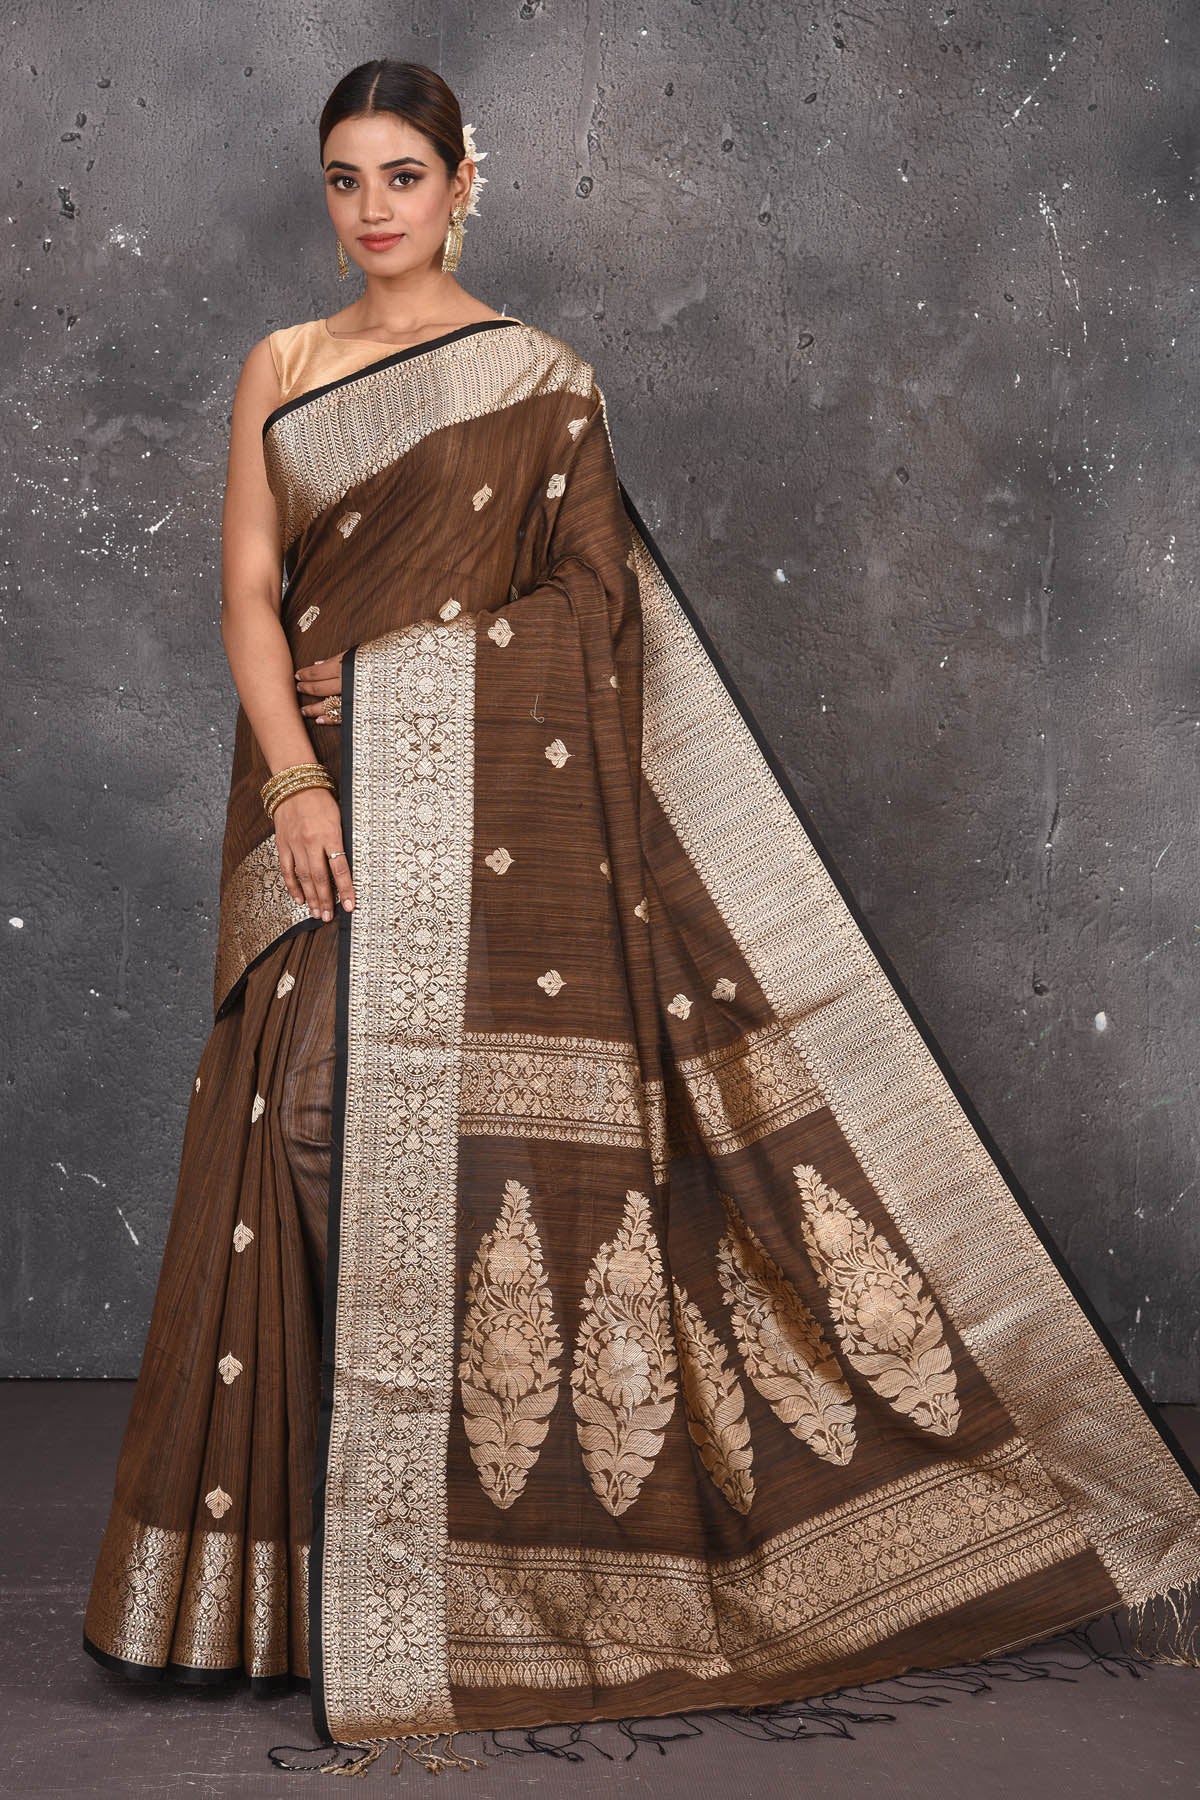 Buy elegant brown zari woven matka Silk Banarasi saree with zari broad border online in USA which has crafted by skilled weaver of Banaras with elegance and grace, this saree is definitely the epitome of beauty and a must have in your collection. Buy designer handwoven banarasi brocade sari with any blouse from Pure Elegance Indian saree store in USA. -Full view with open pallu.